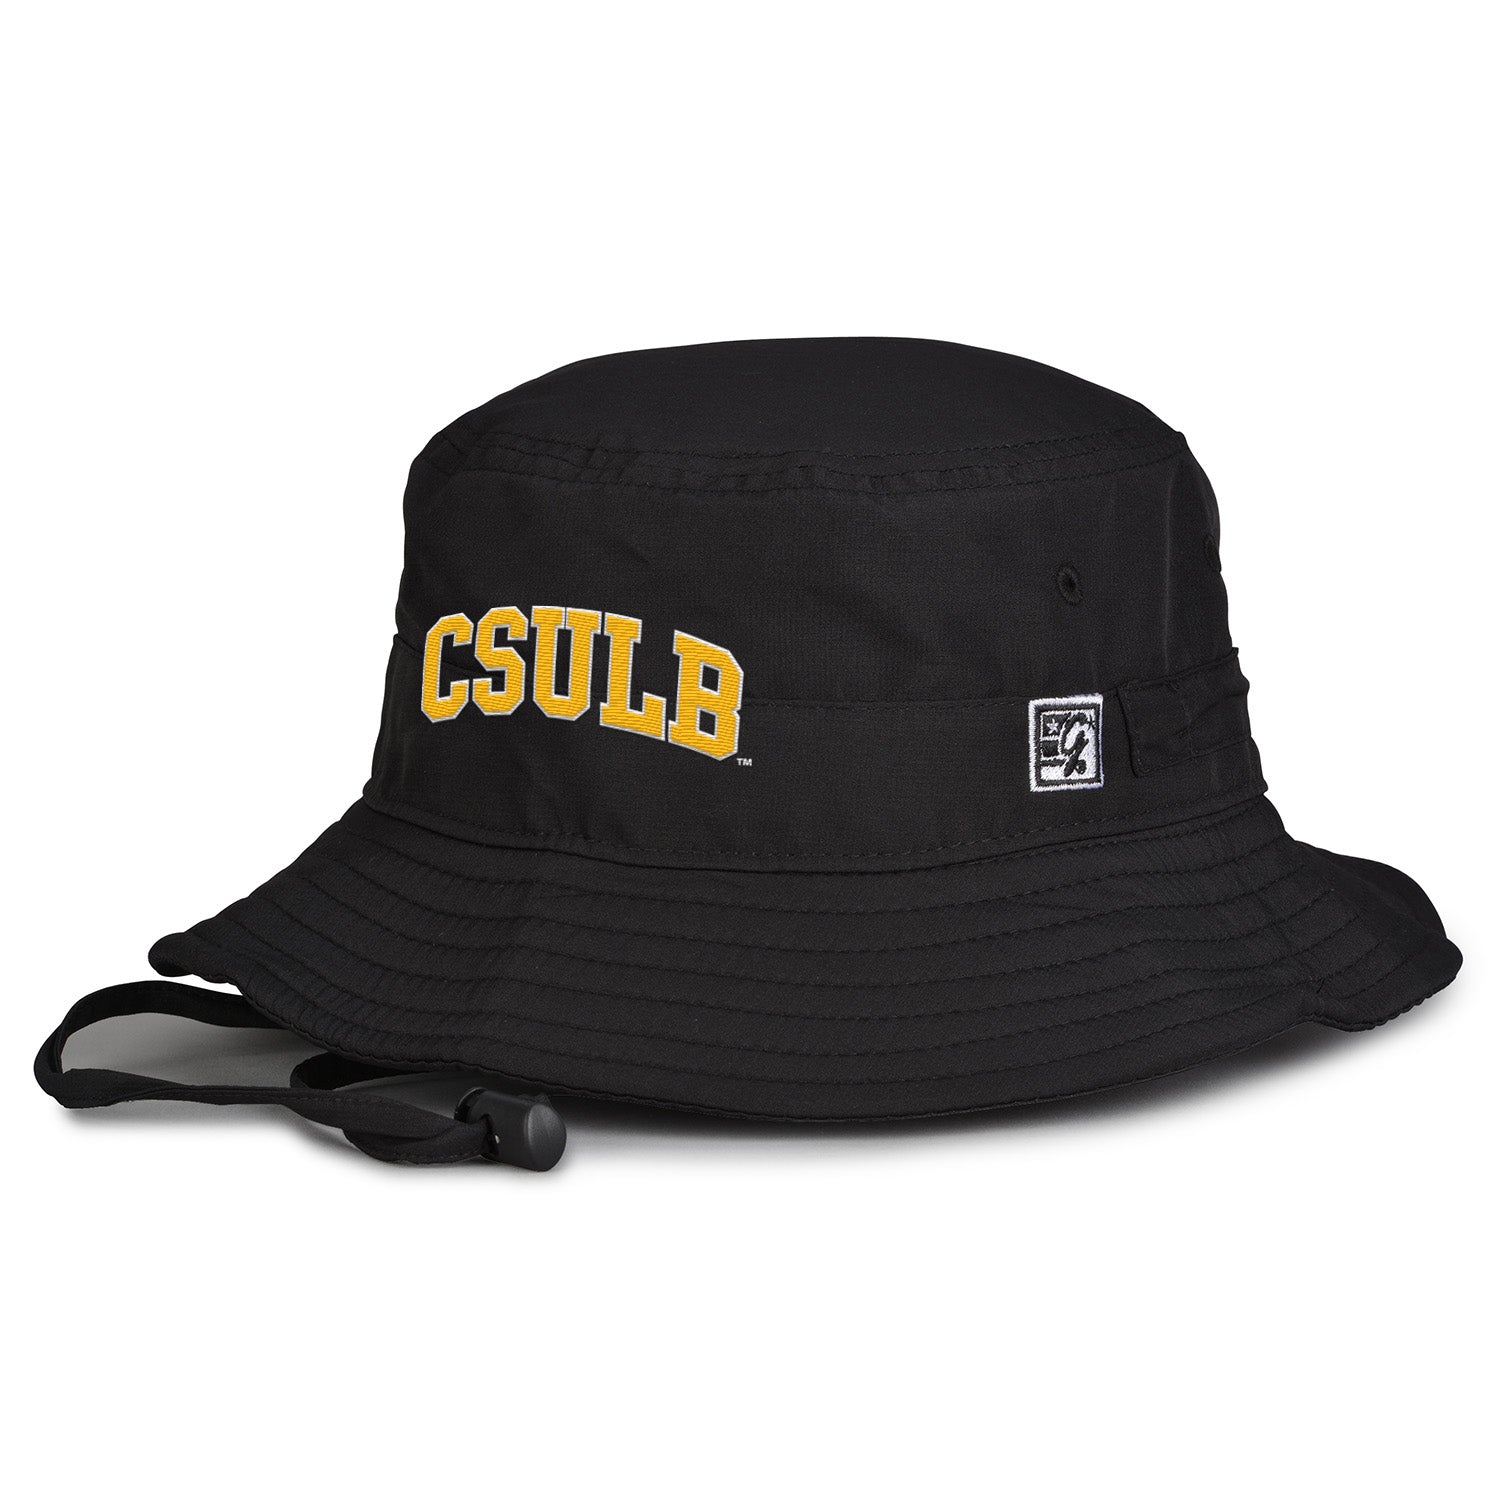 CSULB Bucket Hat - Black, The Game – Long Beach State Official Store